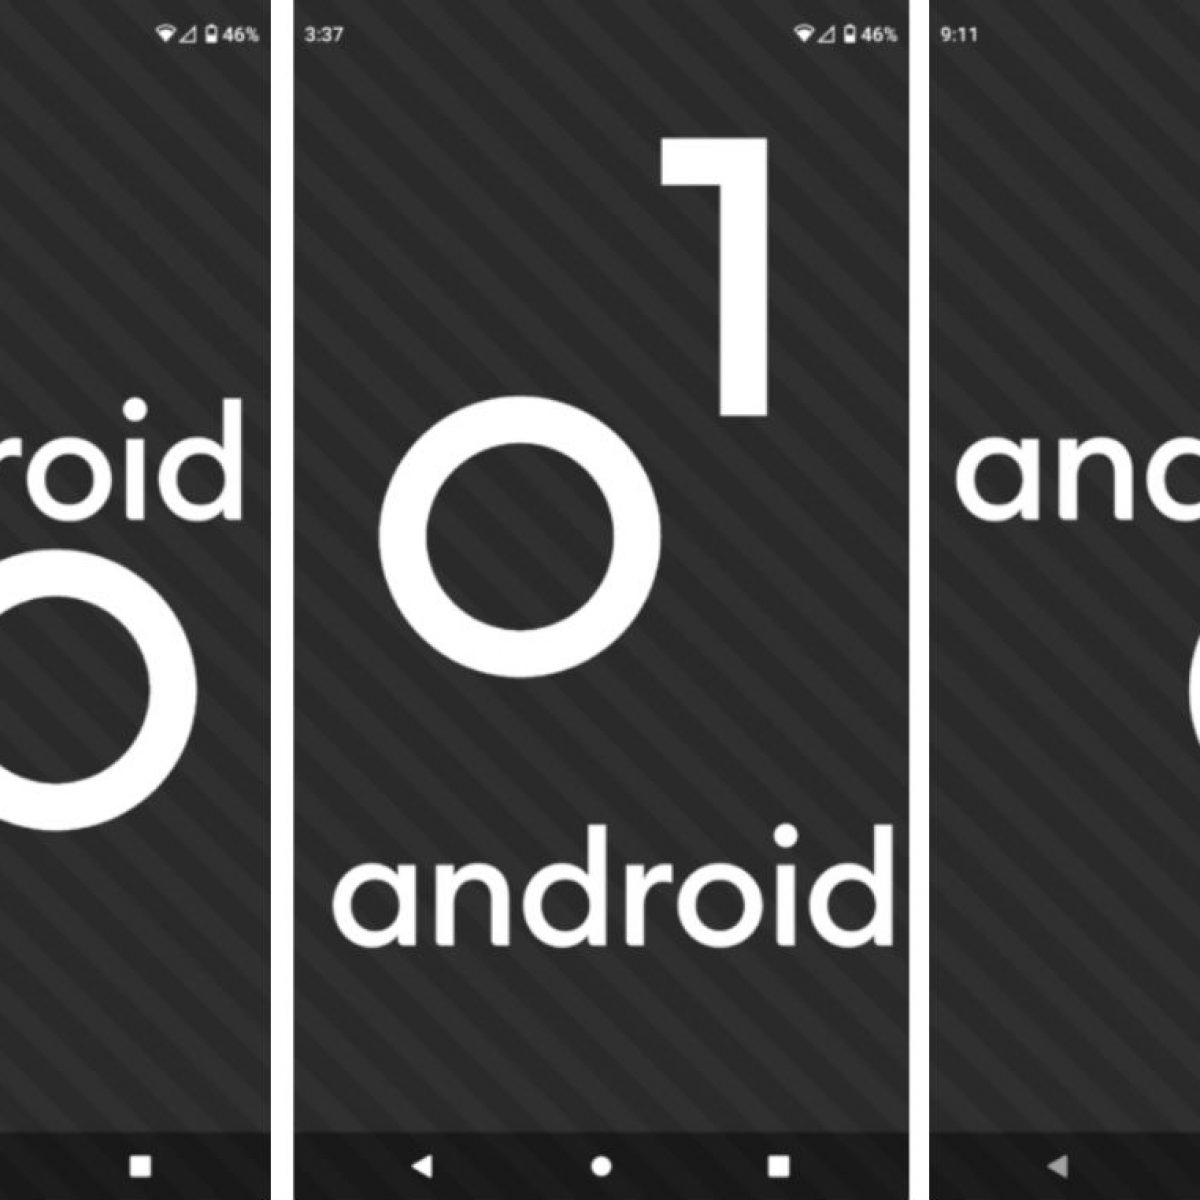 lyrics wisdom so much Whoops: Android Q Easter Egg Found on Essential Phone, Not Pixels